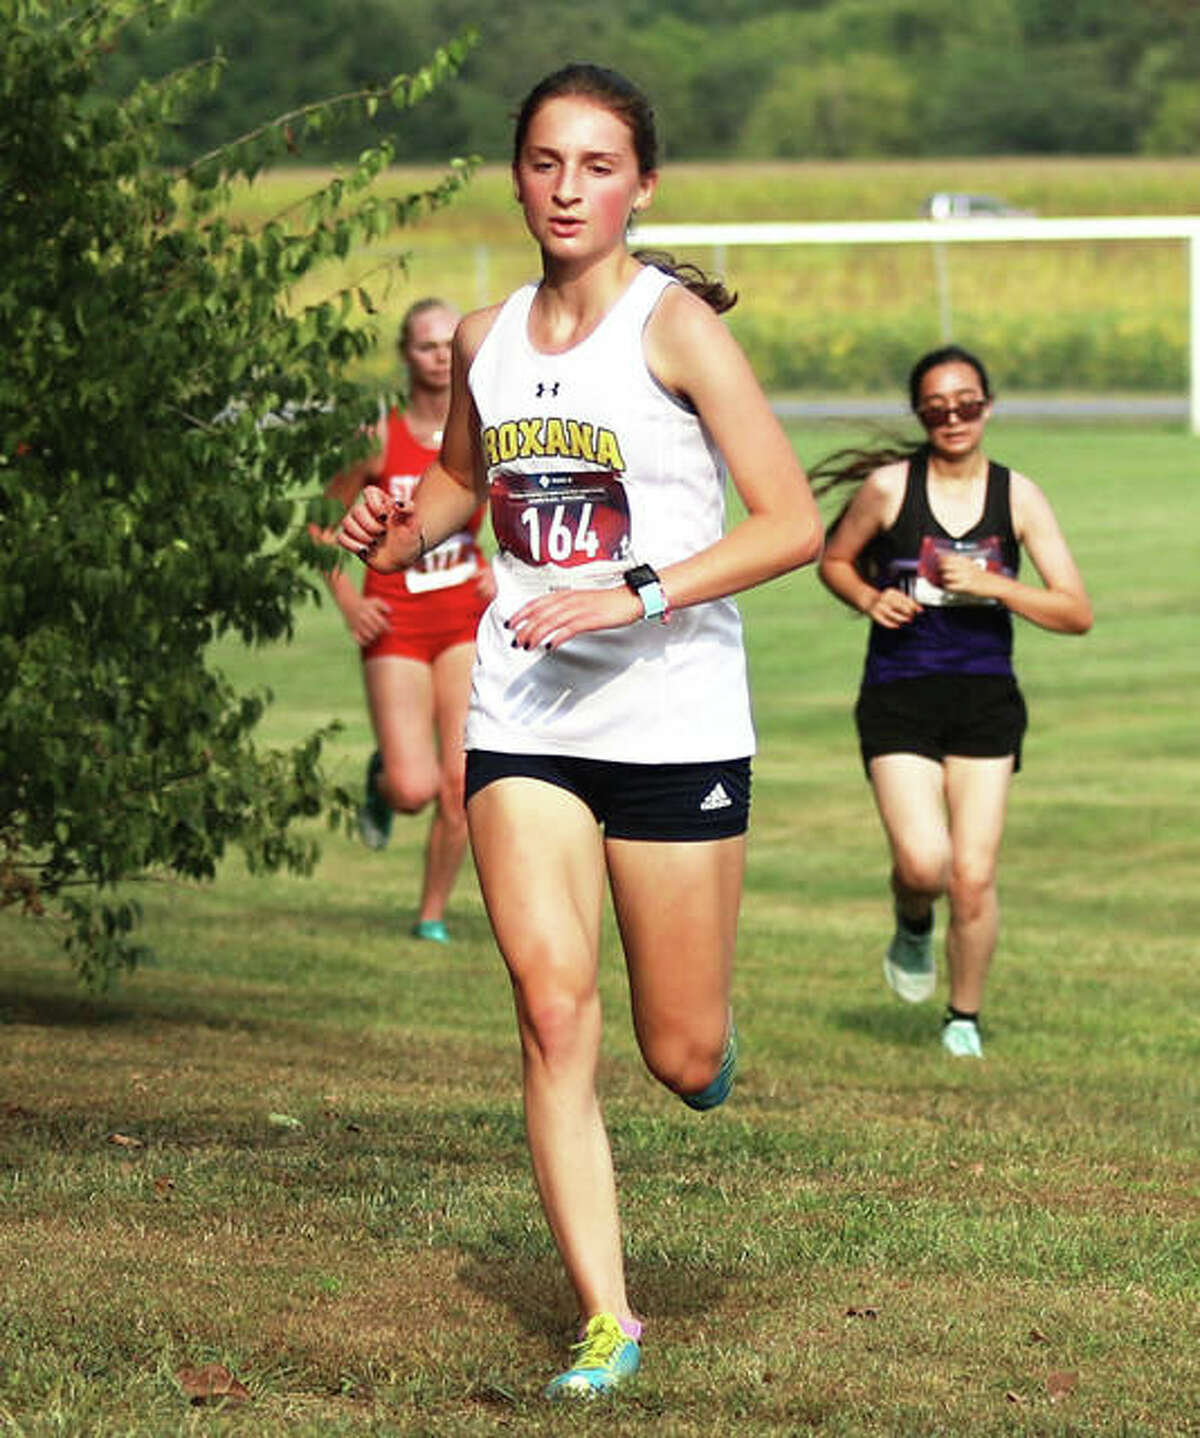 Roxana sophomore Gabrielle Woodruff runs to a personal record time Tuesday at the Staunton Invite at the Staunton Soccer Complex. Woodruff came back Saturday with another PR in the Highland Invite at Alhambra.